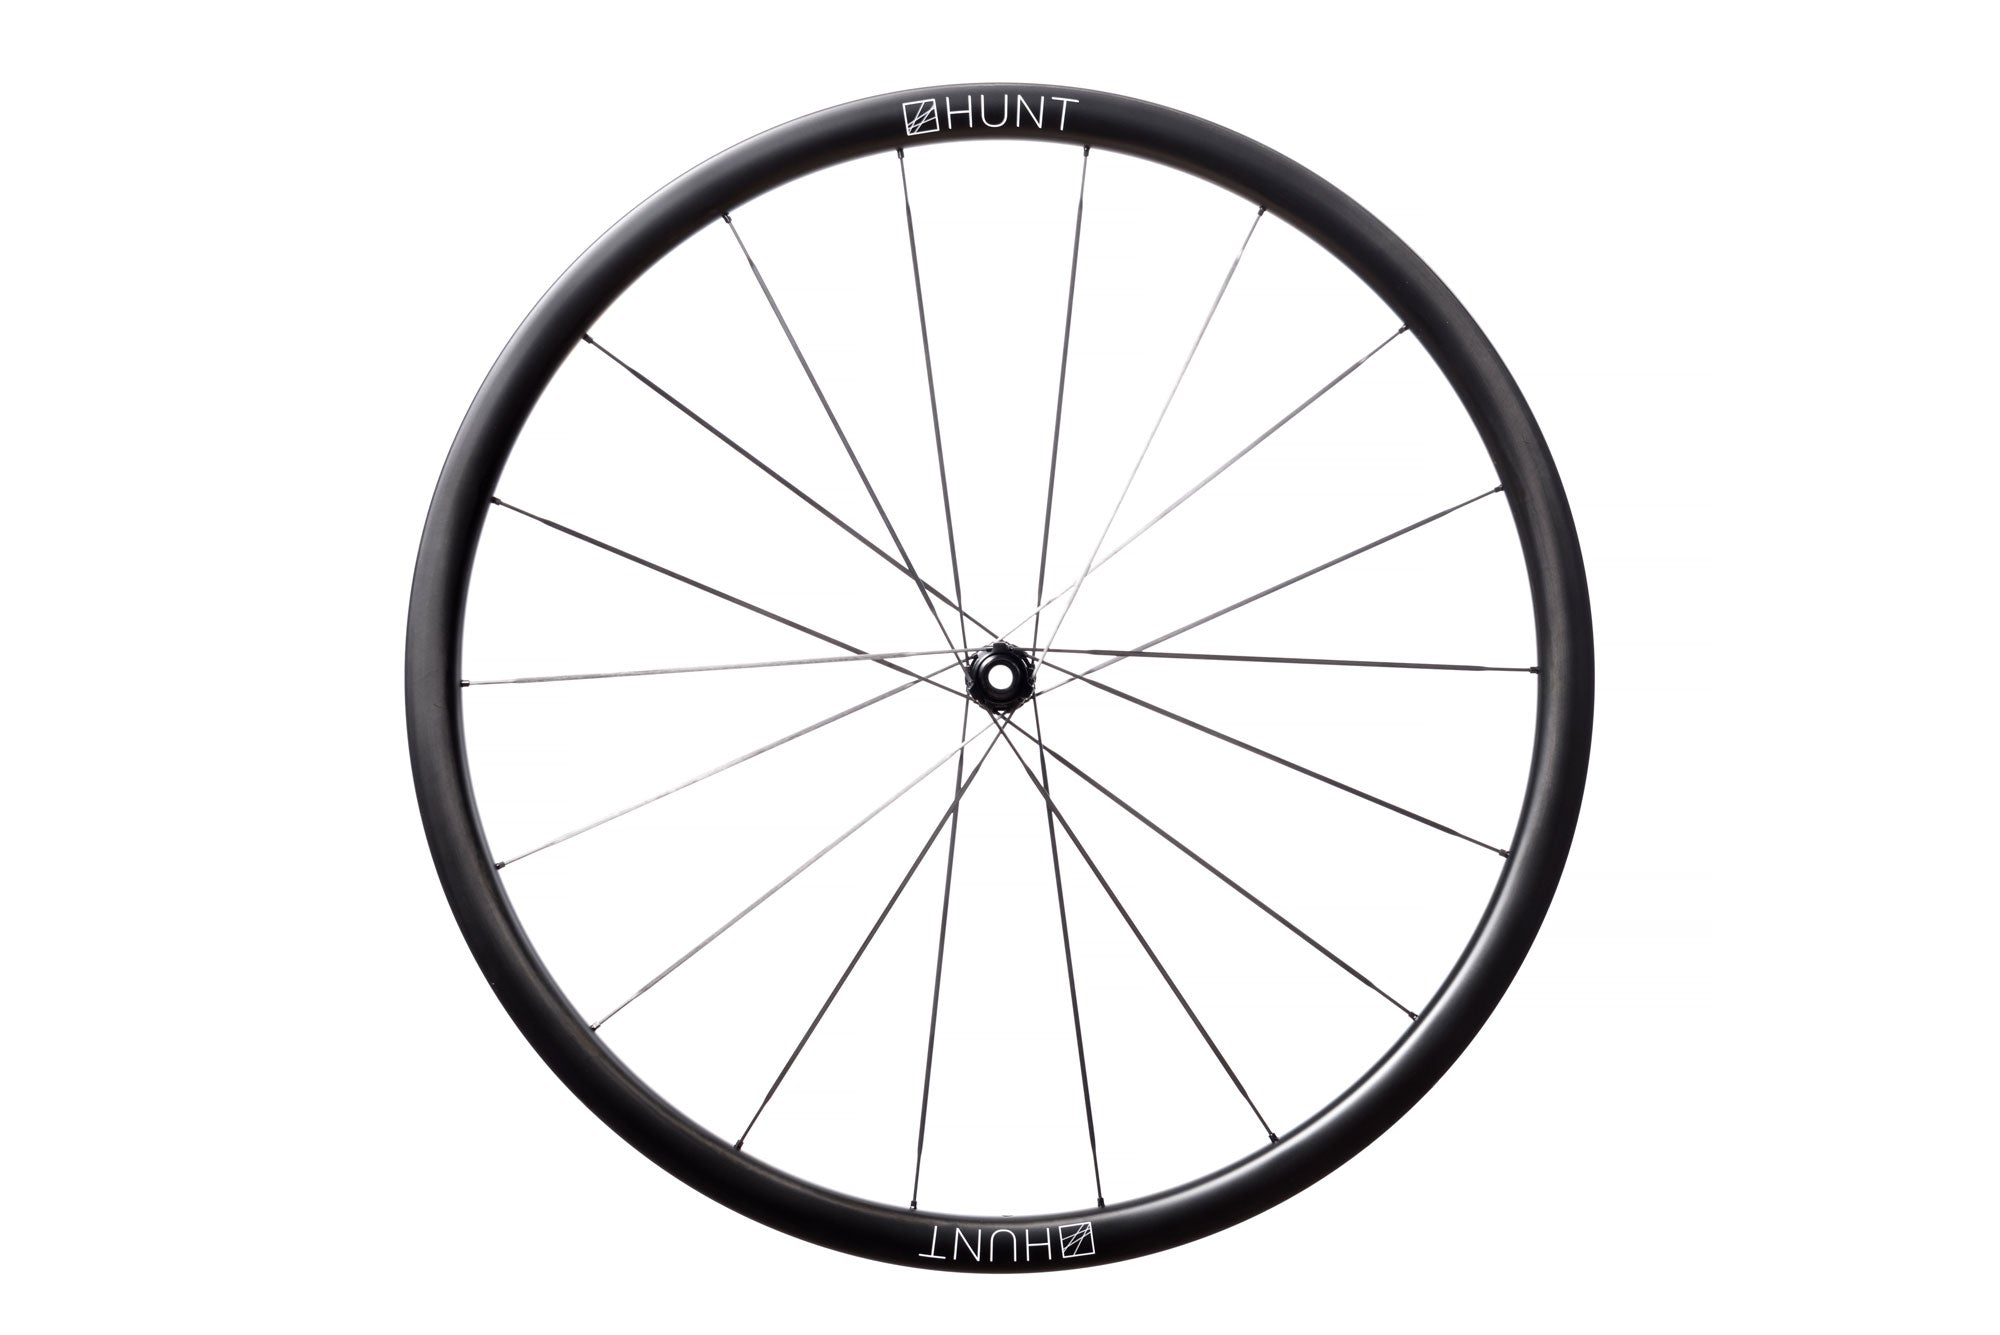 <h1>Rims</h1><i>Ultralight 30mm deep tubular rim with 26mm width, optimized for 23-28c tubular tires. Developed with input from Andy Feather, 2022 British National Hill Climb Champion. Disc-specific tubular profile. Important; please note these are for Tubular tires only and will not work with normal Clincher or Tubeless tires.</i>